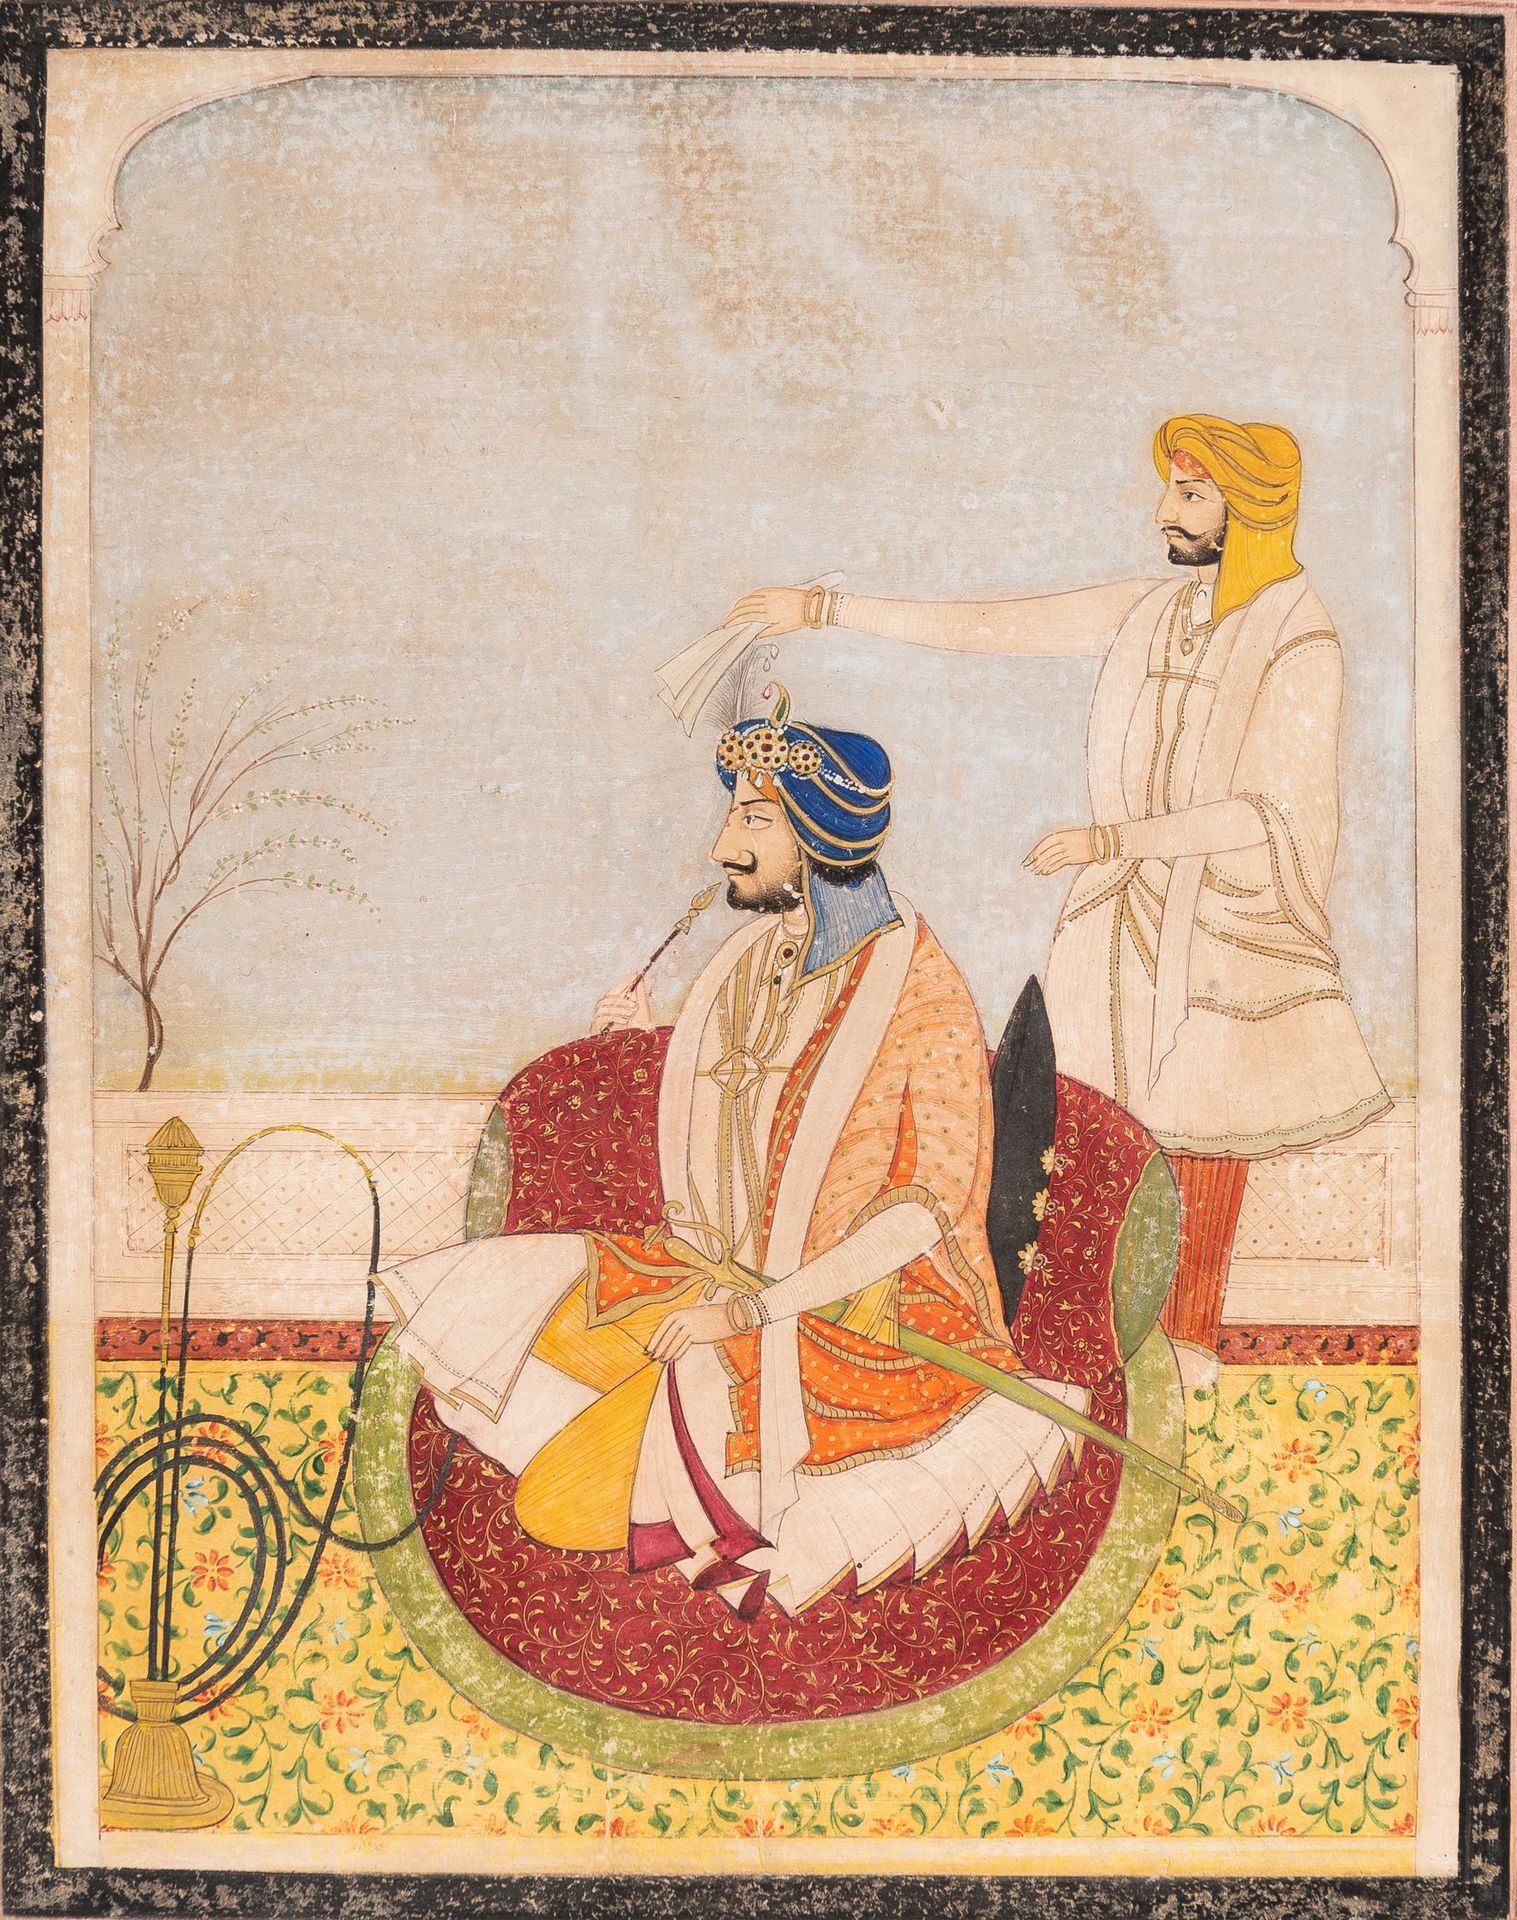 AN INDIAN MINIATURE PAINTING OF A RULER SMOKING A HUQQA PEINTURE MINIATURE INDIE&hellip;